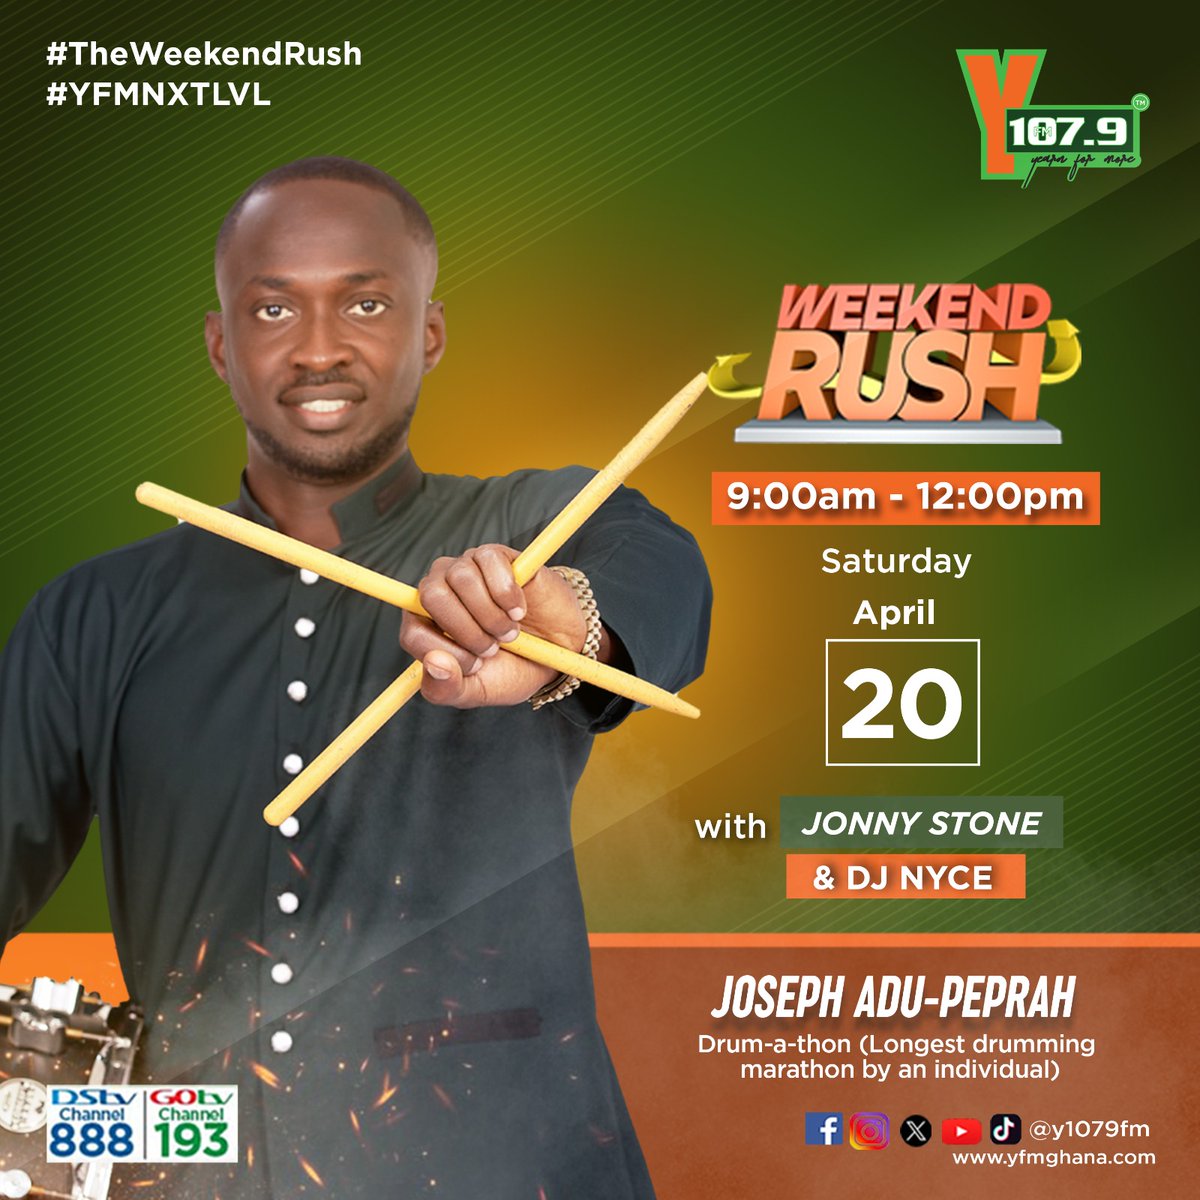 In the era of 'thons', we have @yawdrumathon coming to talk about his Drum-a-thon on #WeekendRush